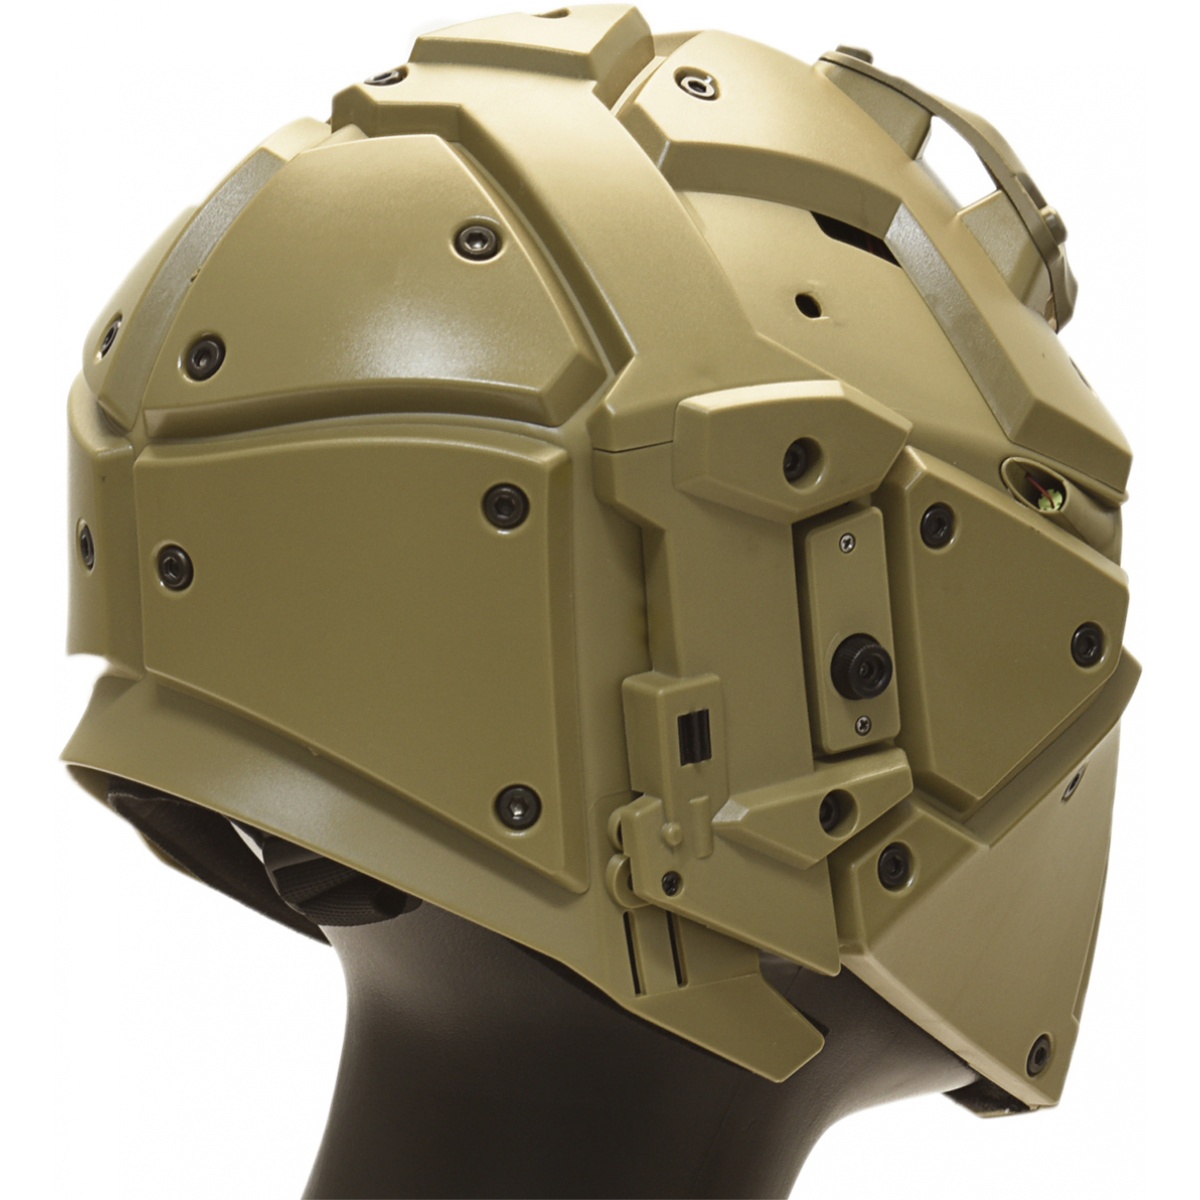 Wosport Tactical Helmet W Nvg Shroud And Transfer Base Tan Airsoft